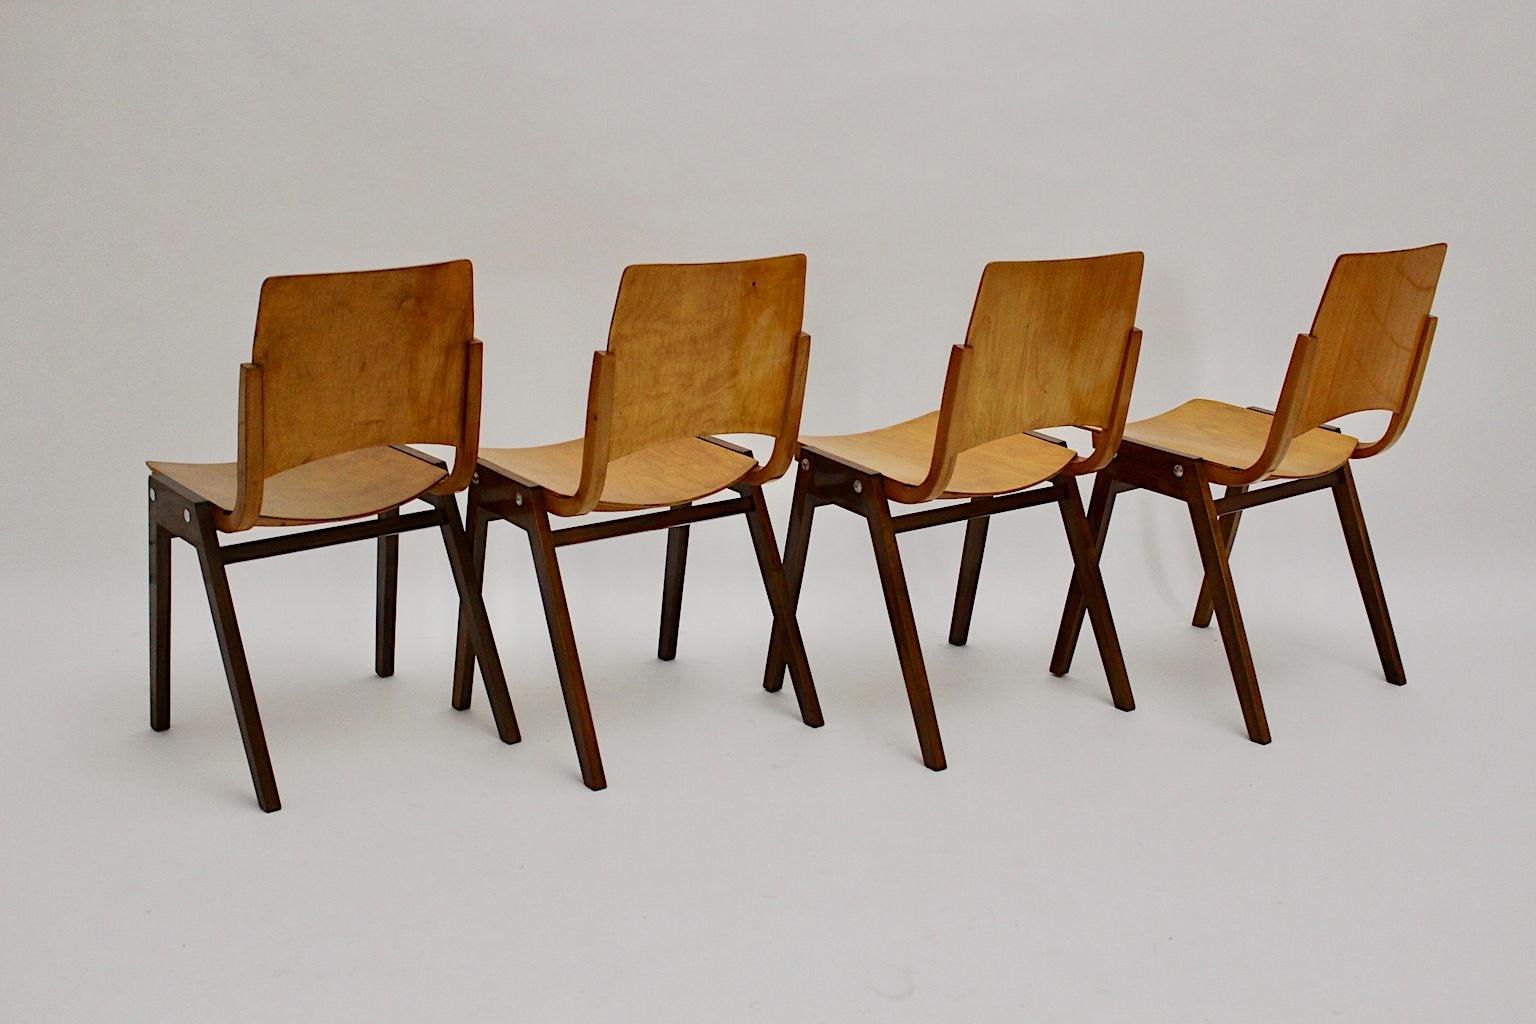 Beech Mid-Century Modern Vintage Set of Four Dining Chair Roland Rainer, 1952, Austria For Sale